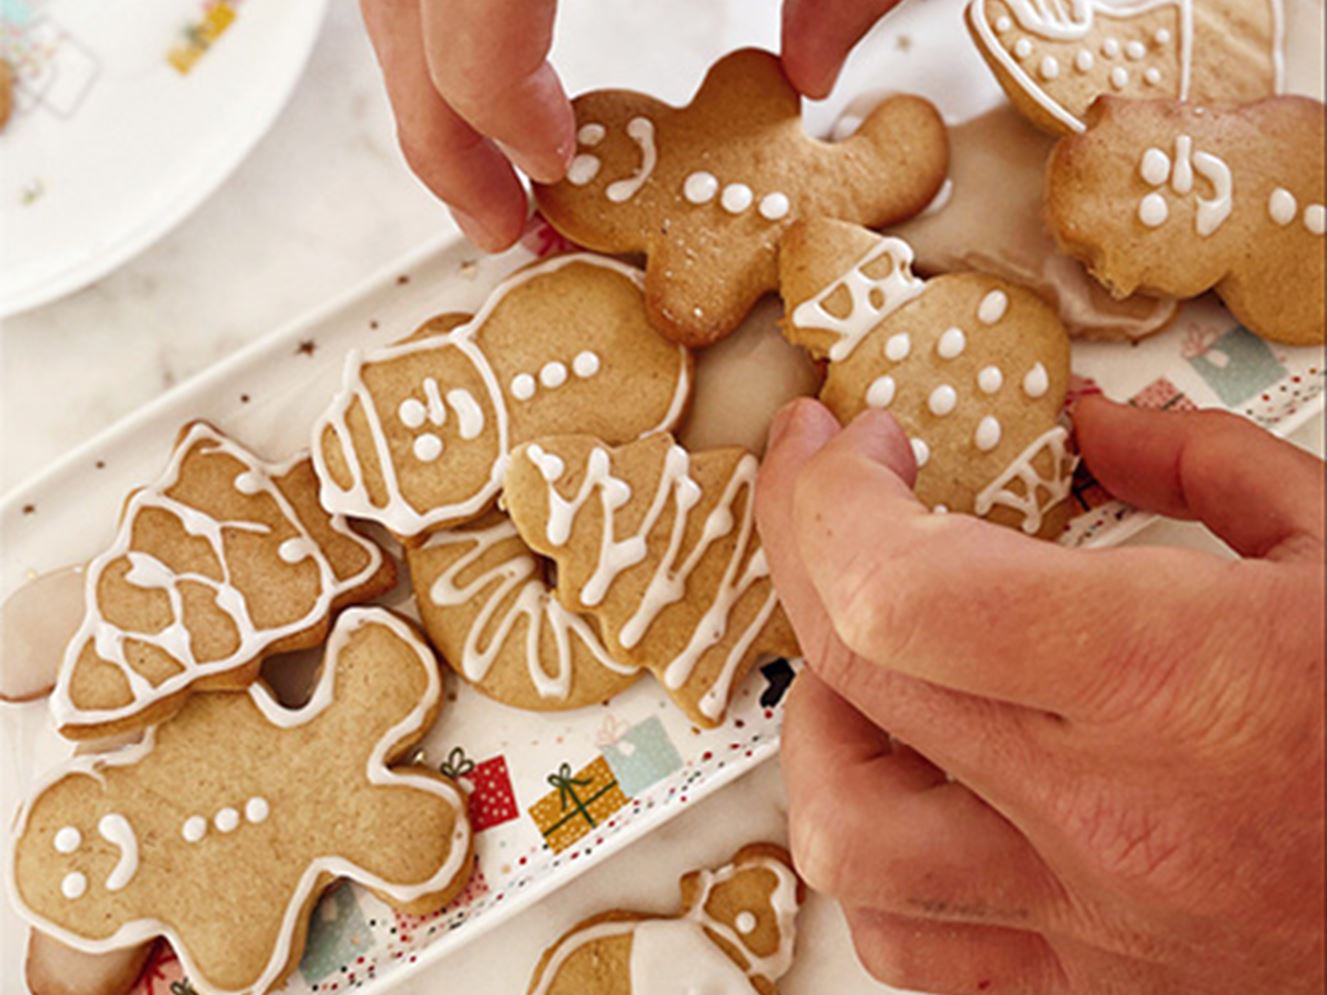 Hands arranging Christmas gingerbread cookies onto a Christmas plate